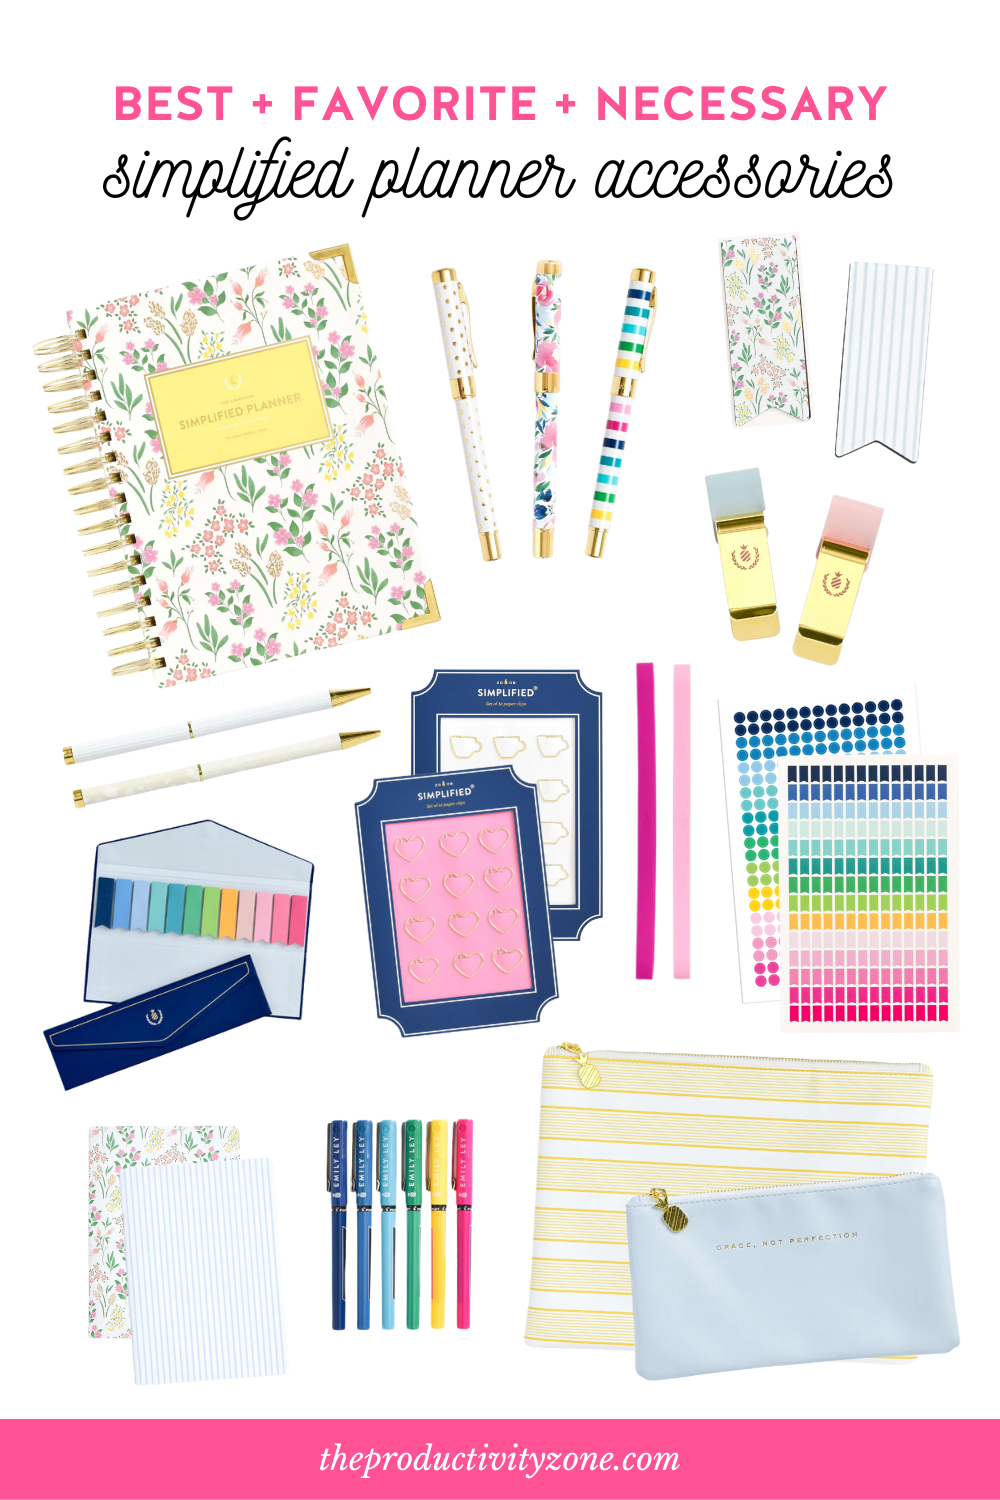 Simplified Planner accessories shopping guide including a daily planner, pens, pen clips, page markers, paper clips, stickers, sticky flags, mini notebooks, stretchy bands, planner and pencil pouches